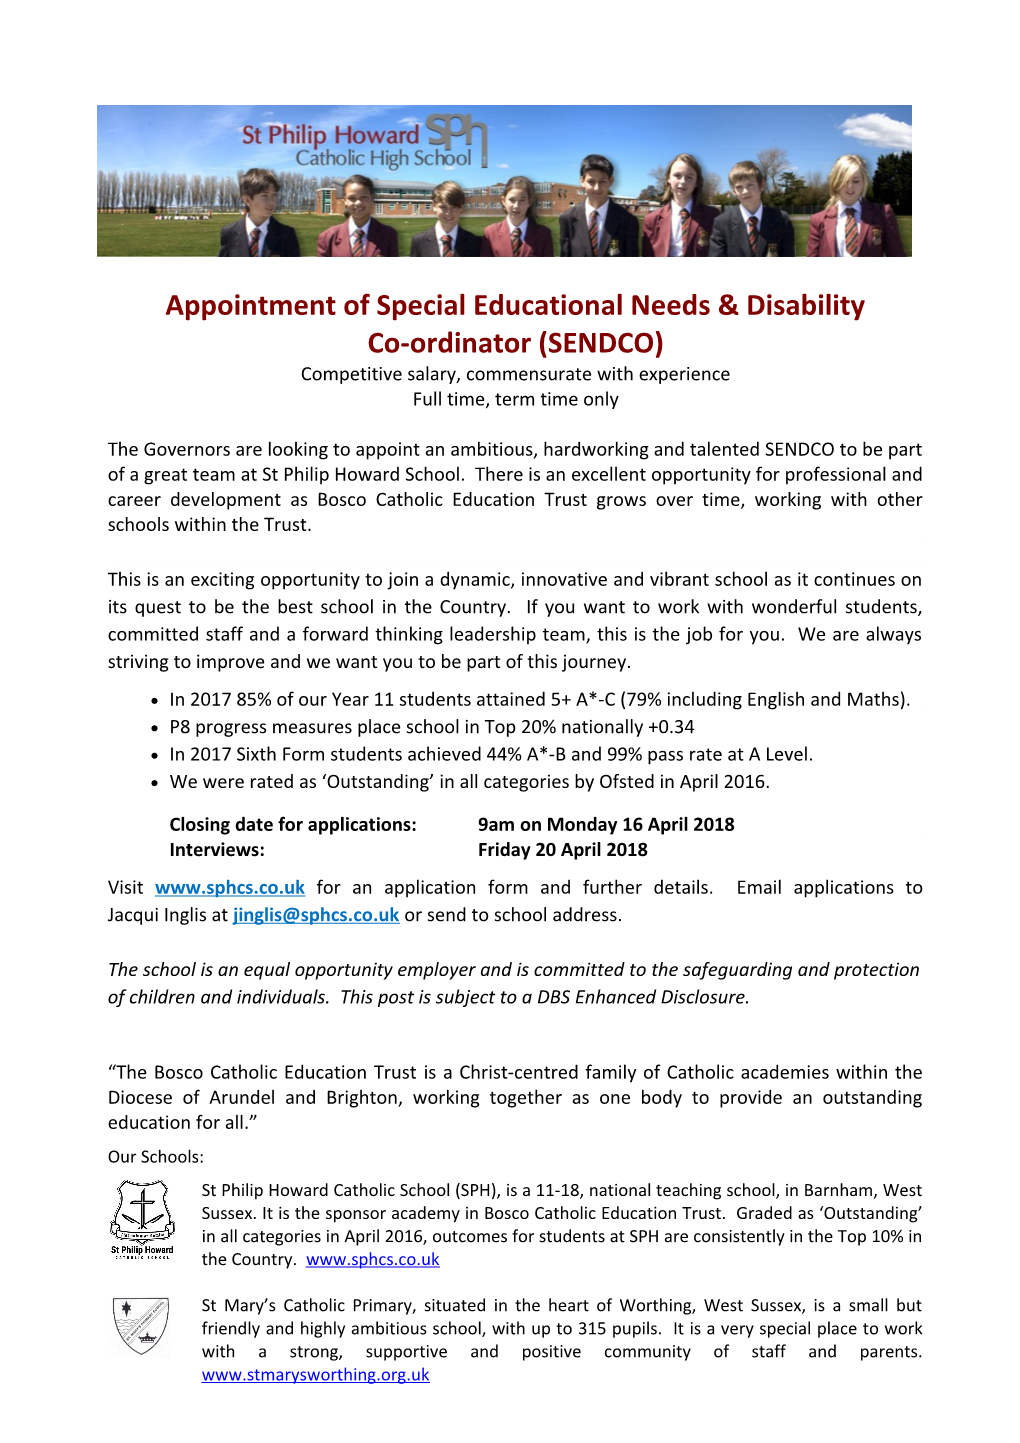 Appointment of Special Educational Needs & Disabilitycoordinator (SENDCO)